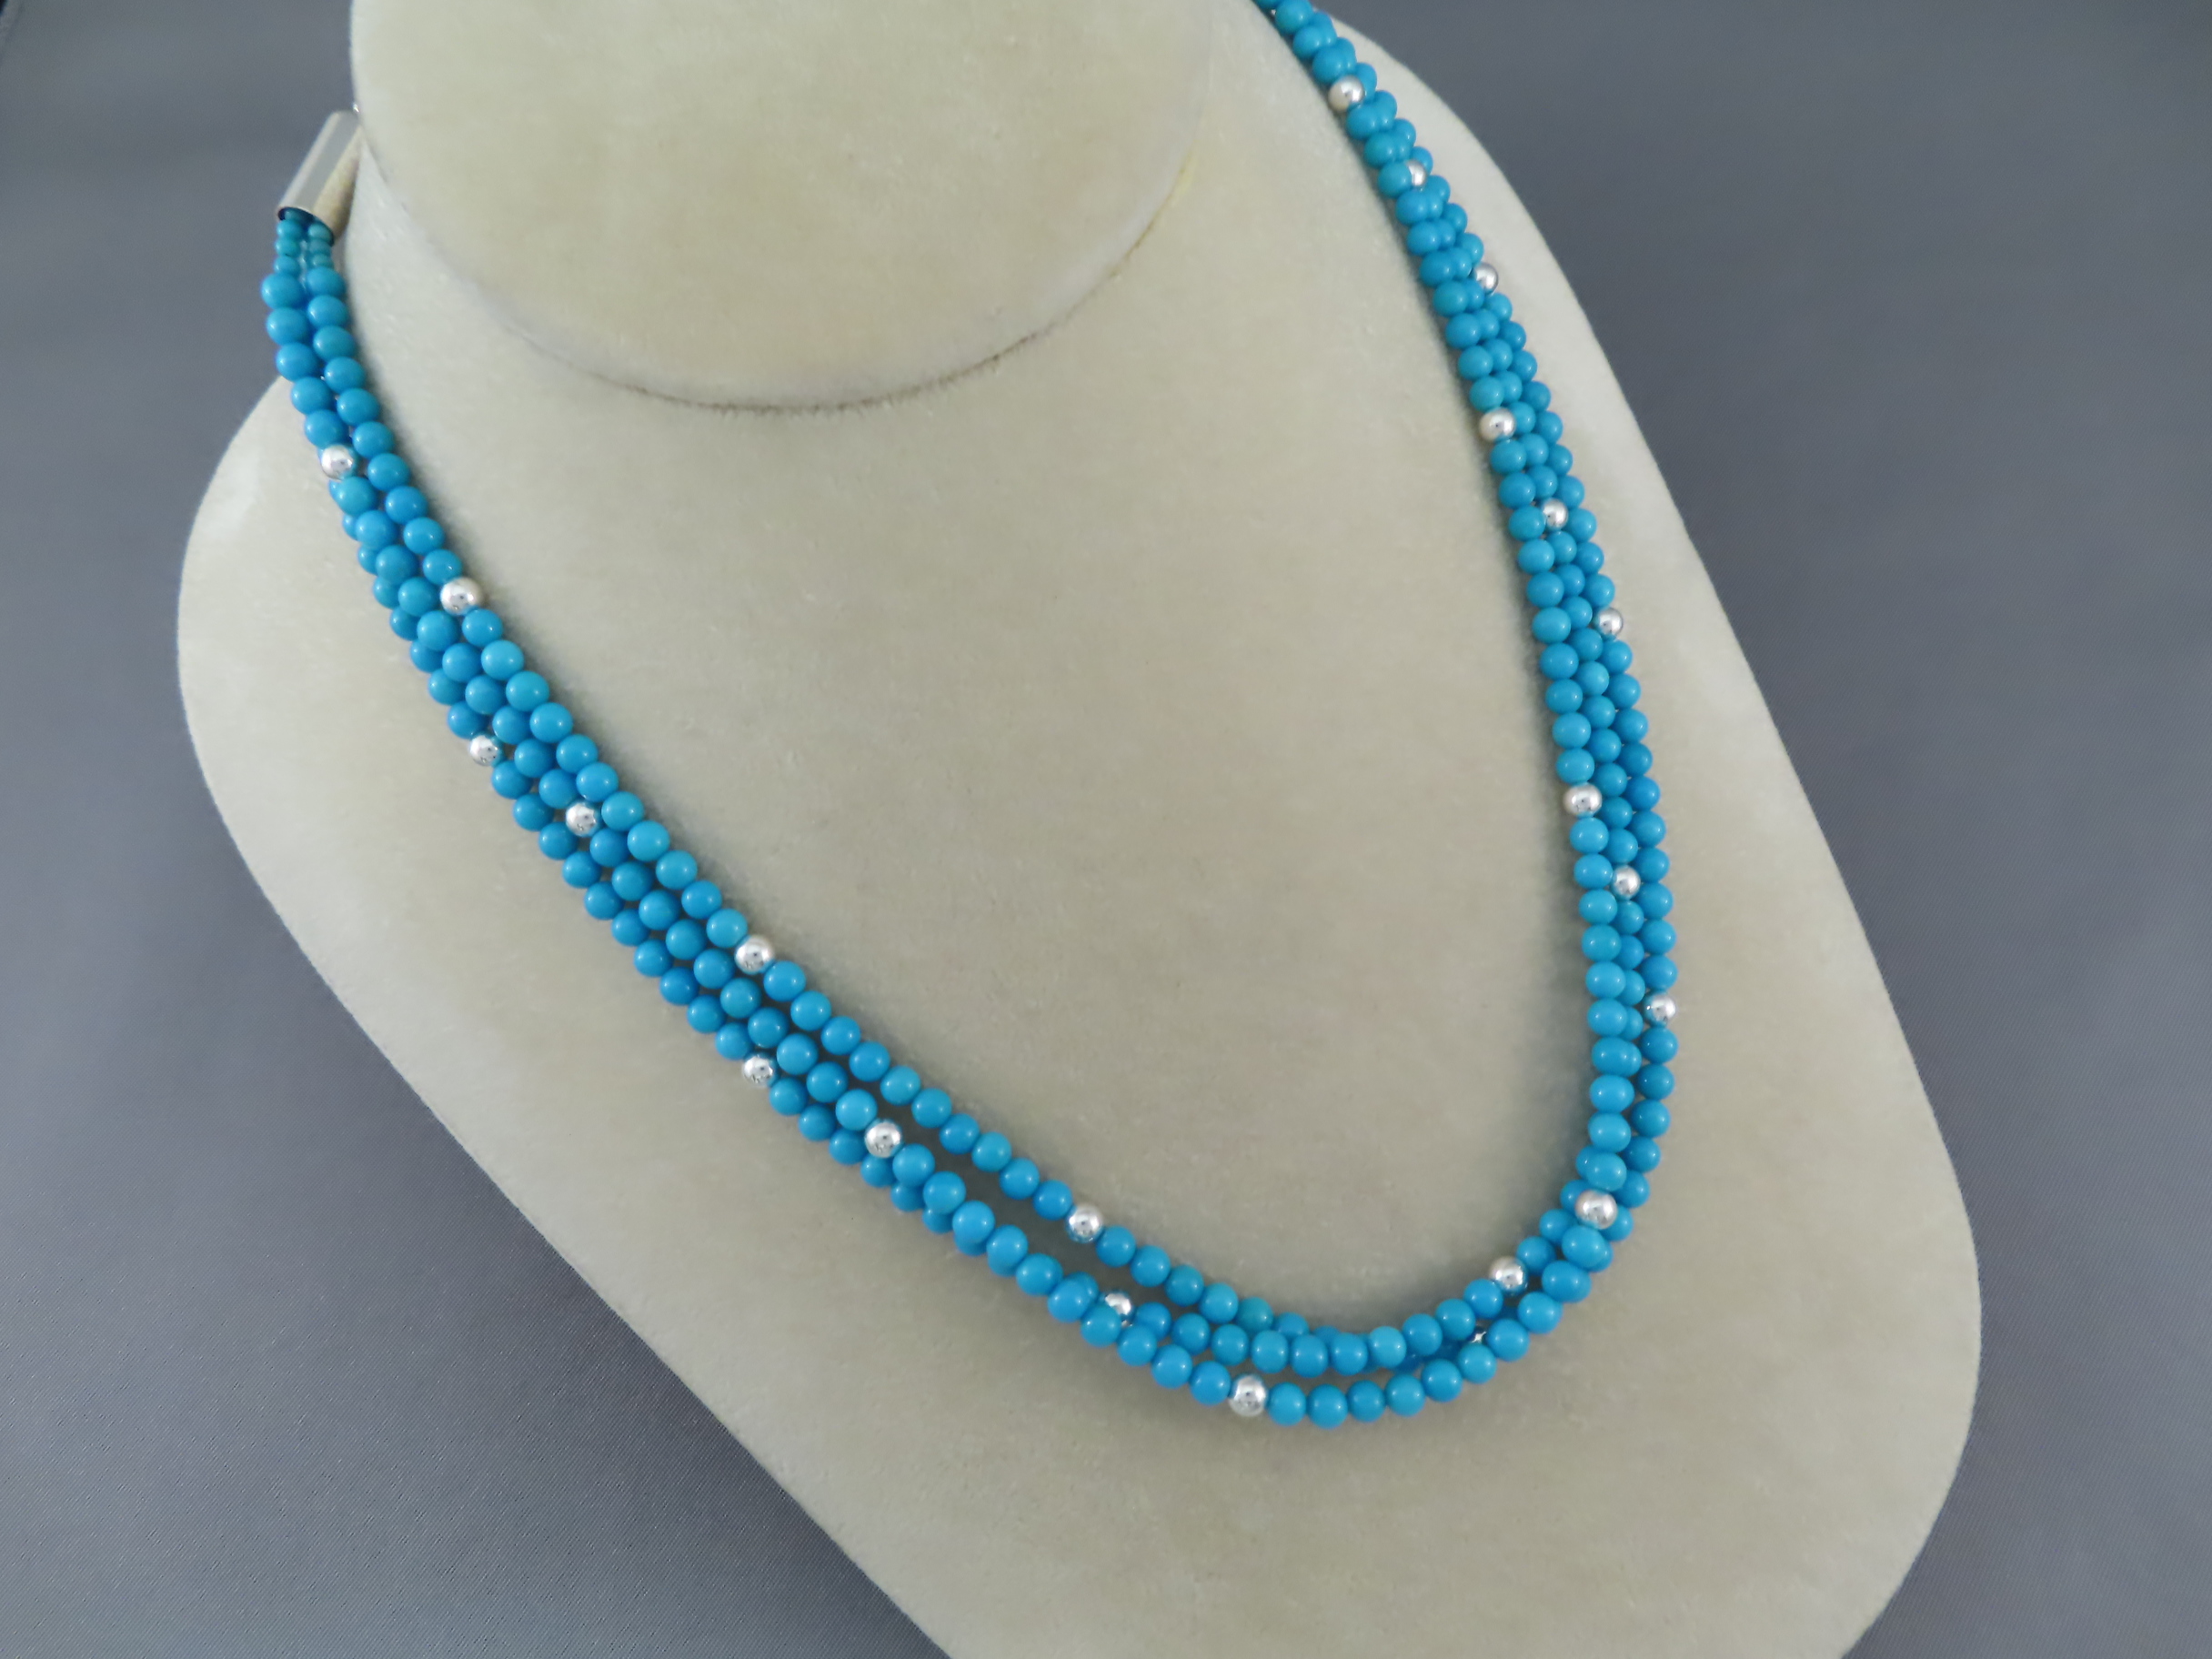 3-Strand Sleeping Beauty Turquoise Necklace by Desiree Yellowhorse ...